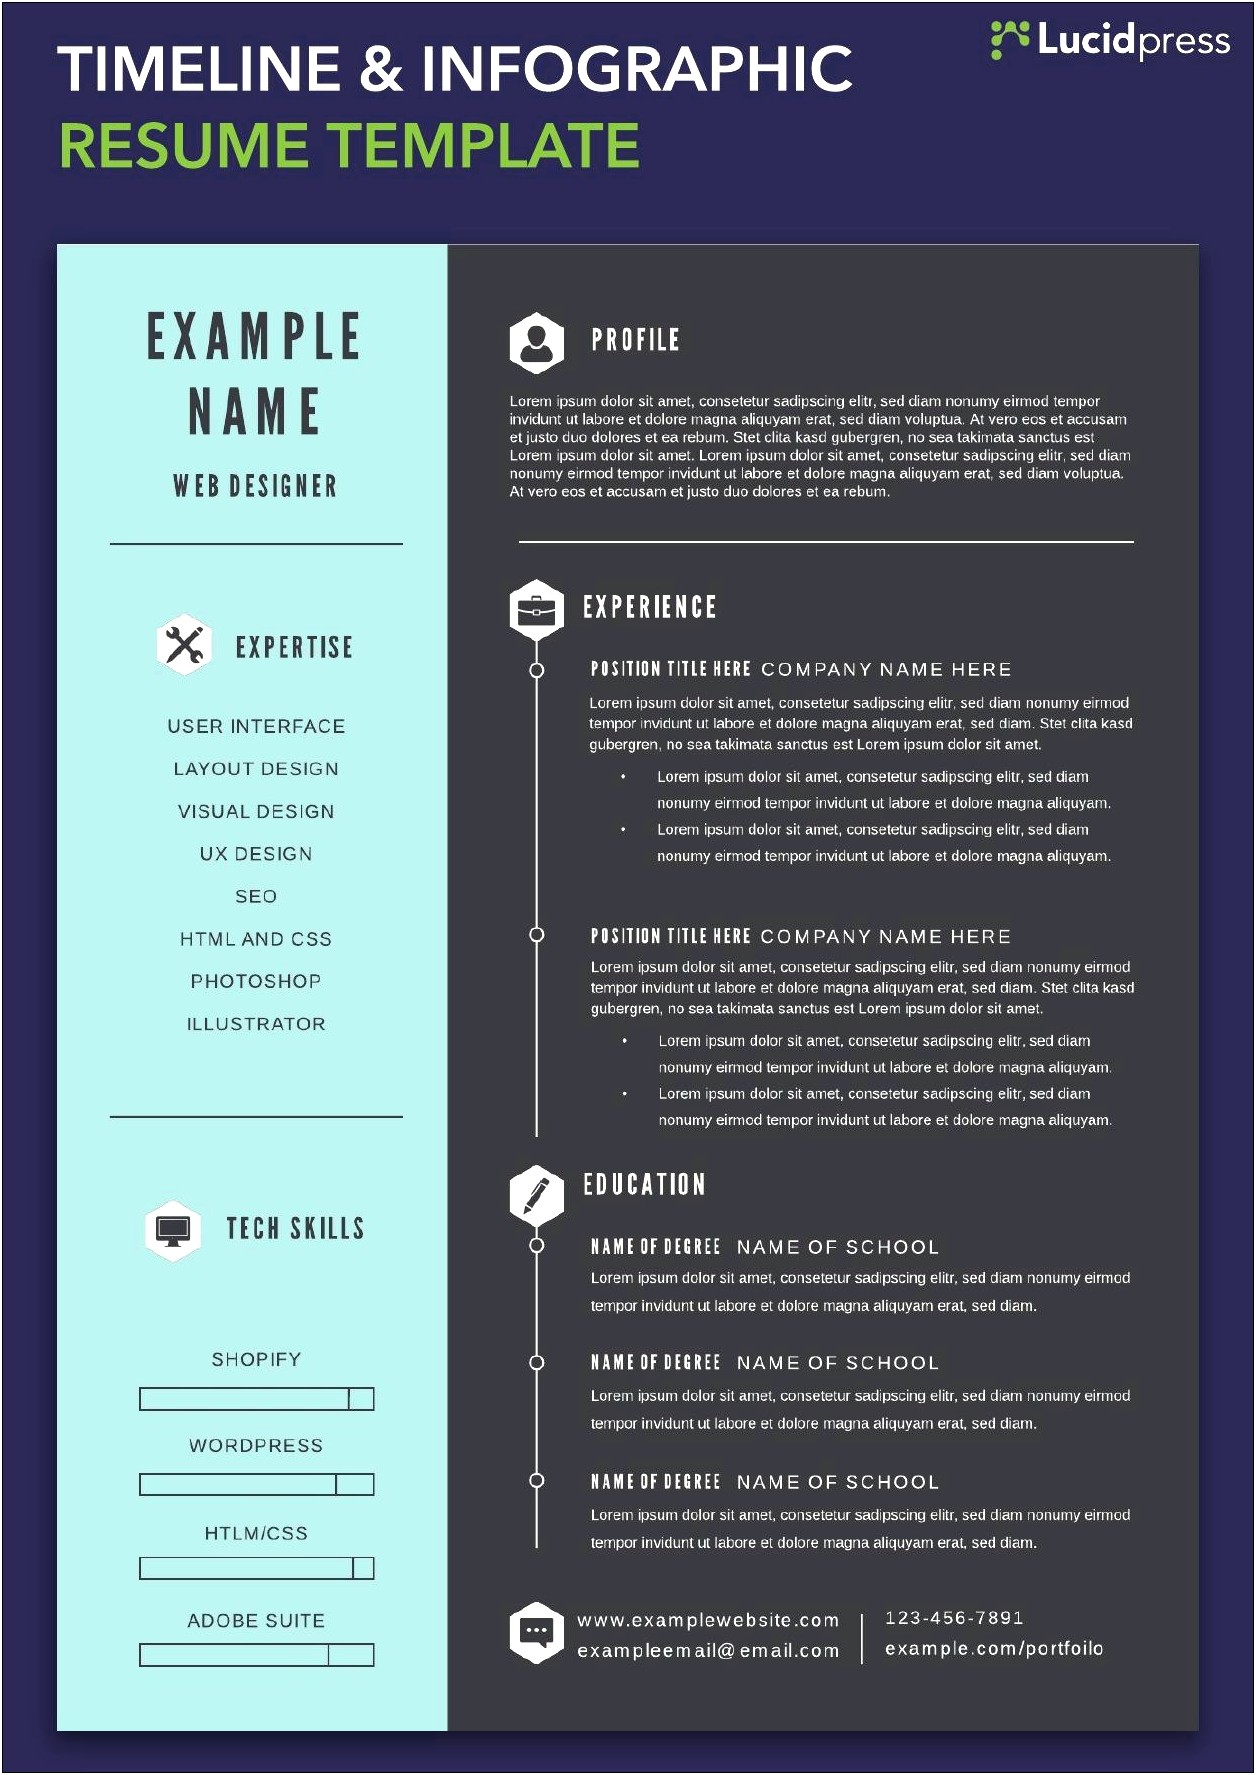 Combination Resume Free Template 2019